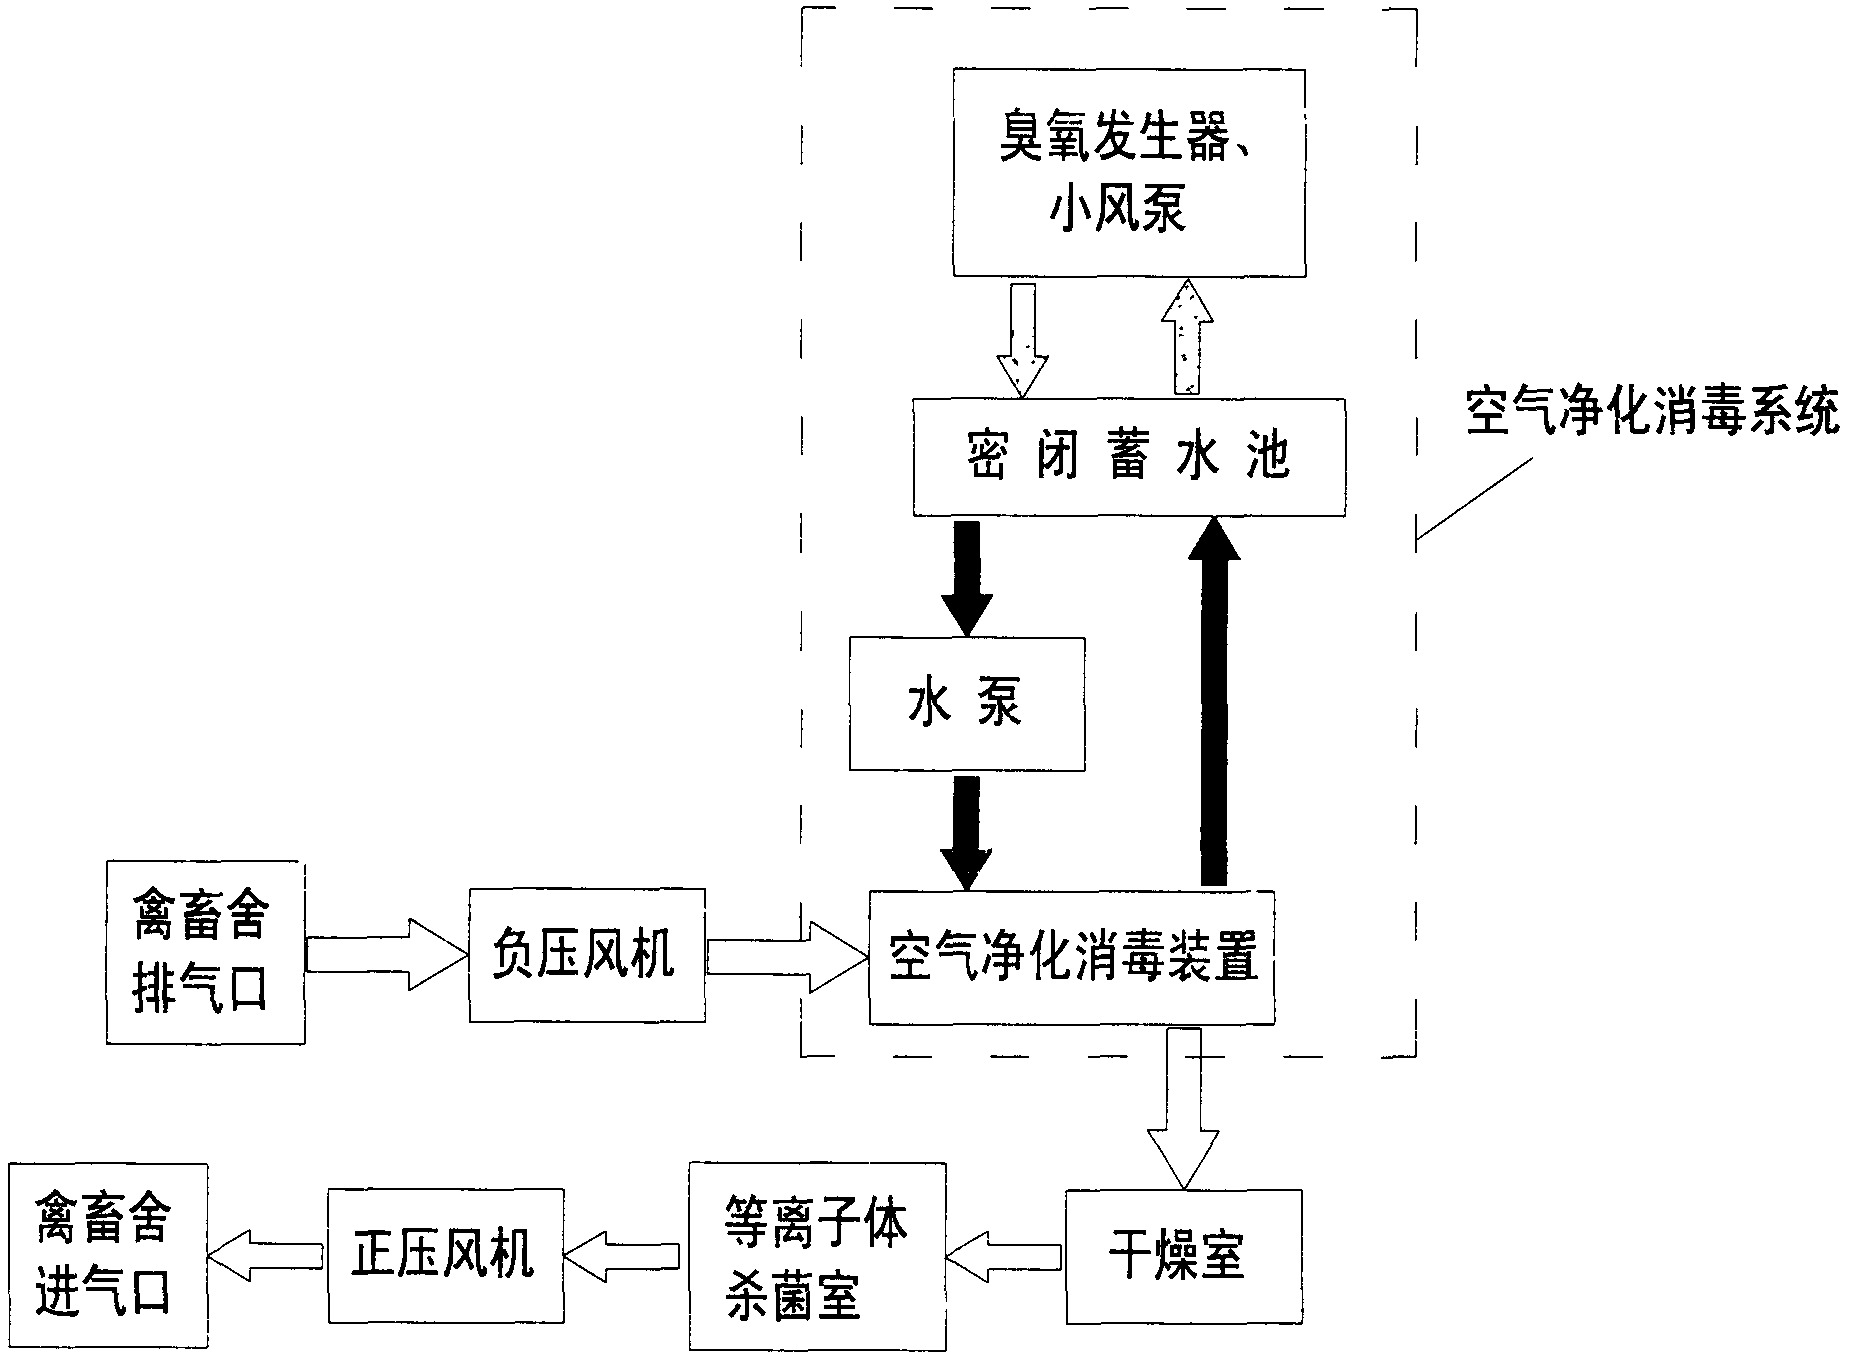 Sterilization and disinfection purification device and method for air in livestock shed